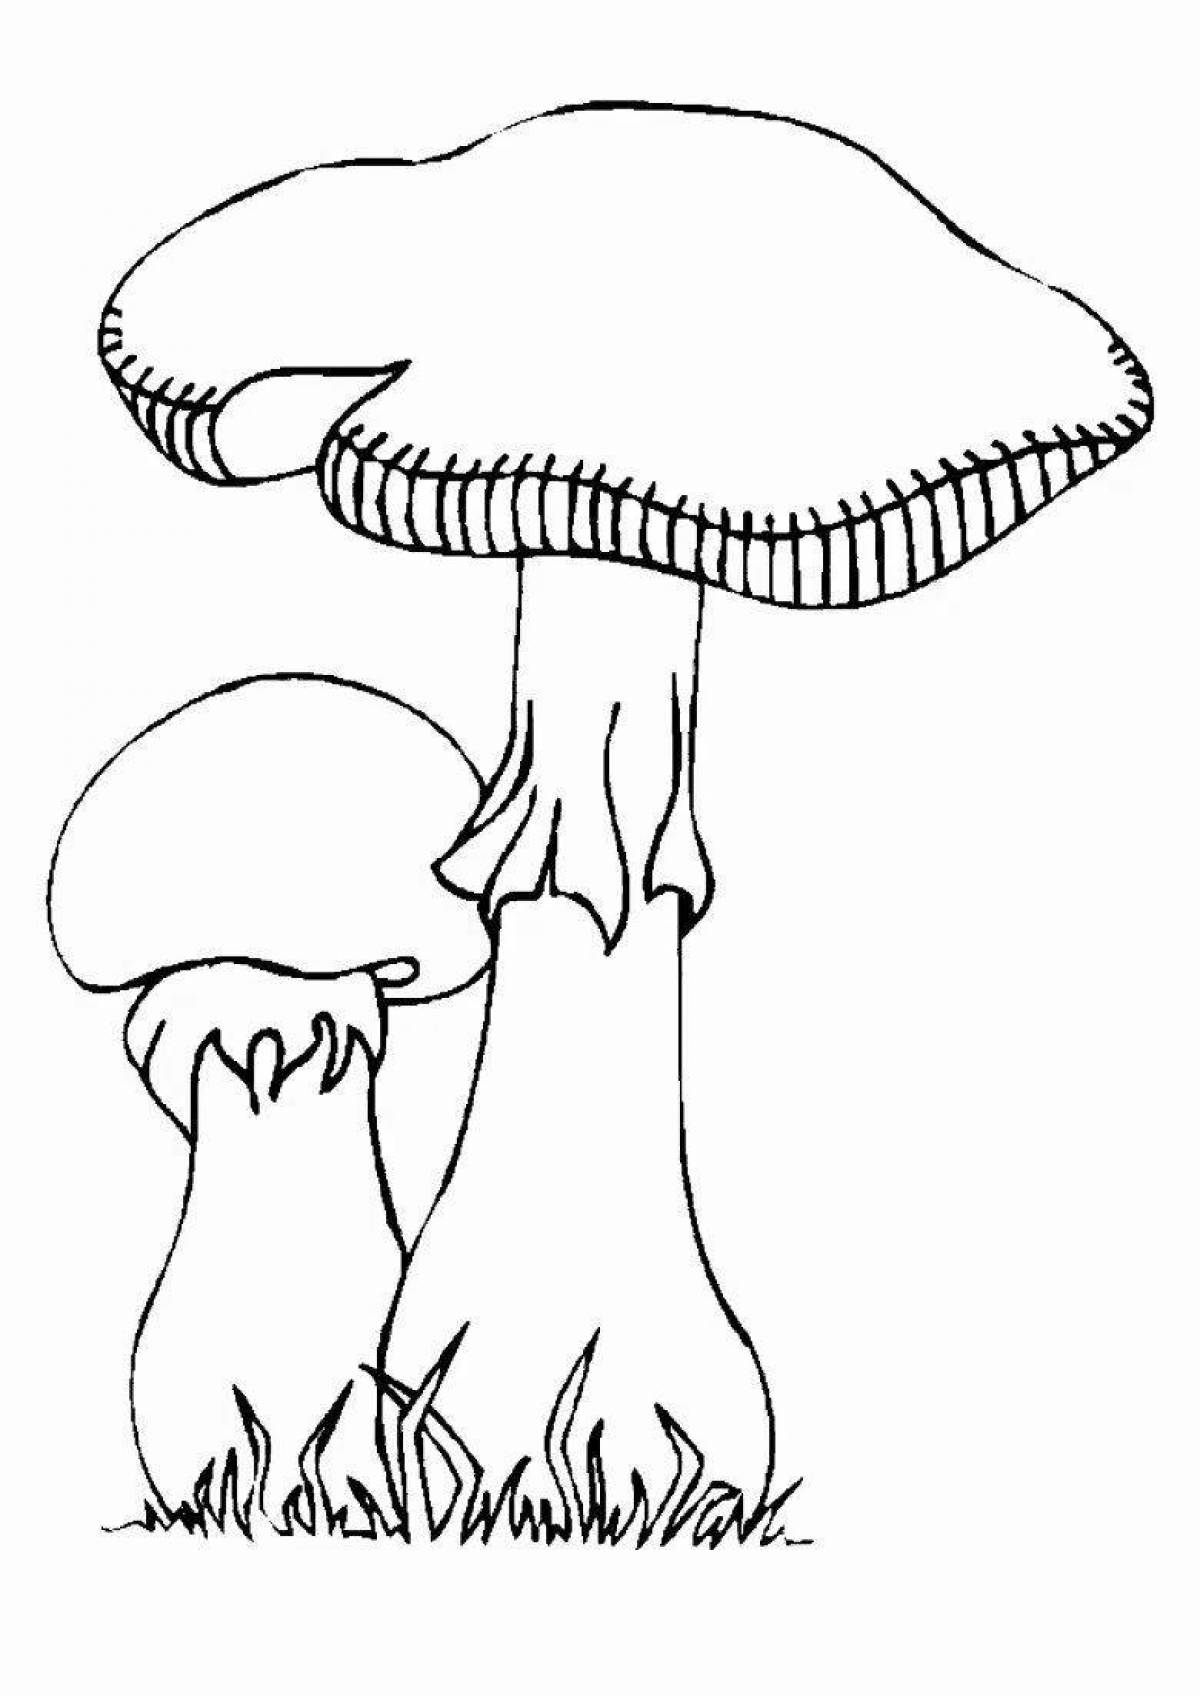 Coloring page spectacular death cap